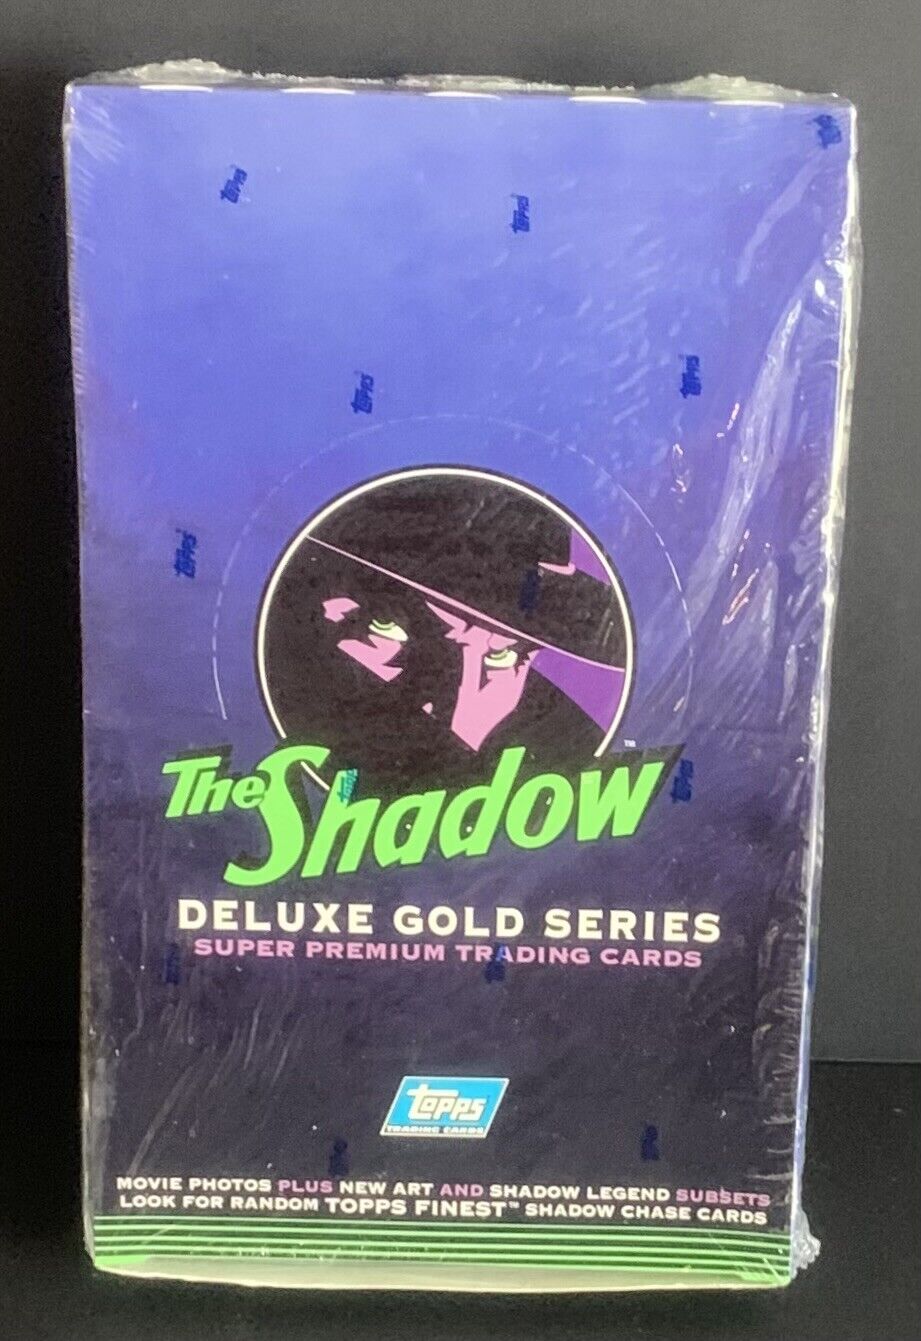 1994 Topps The Shadow Deluxe Gold Series Hobby Box Unopened